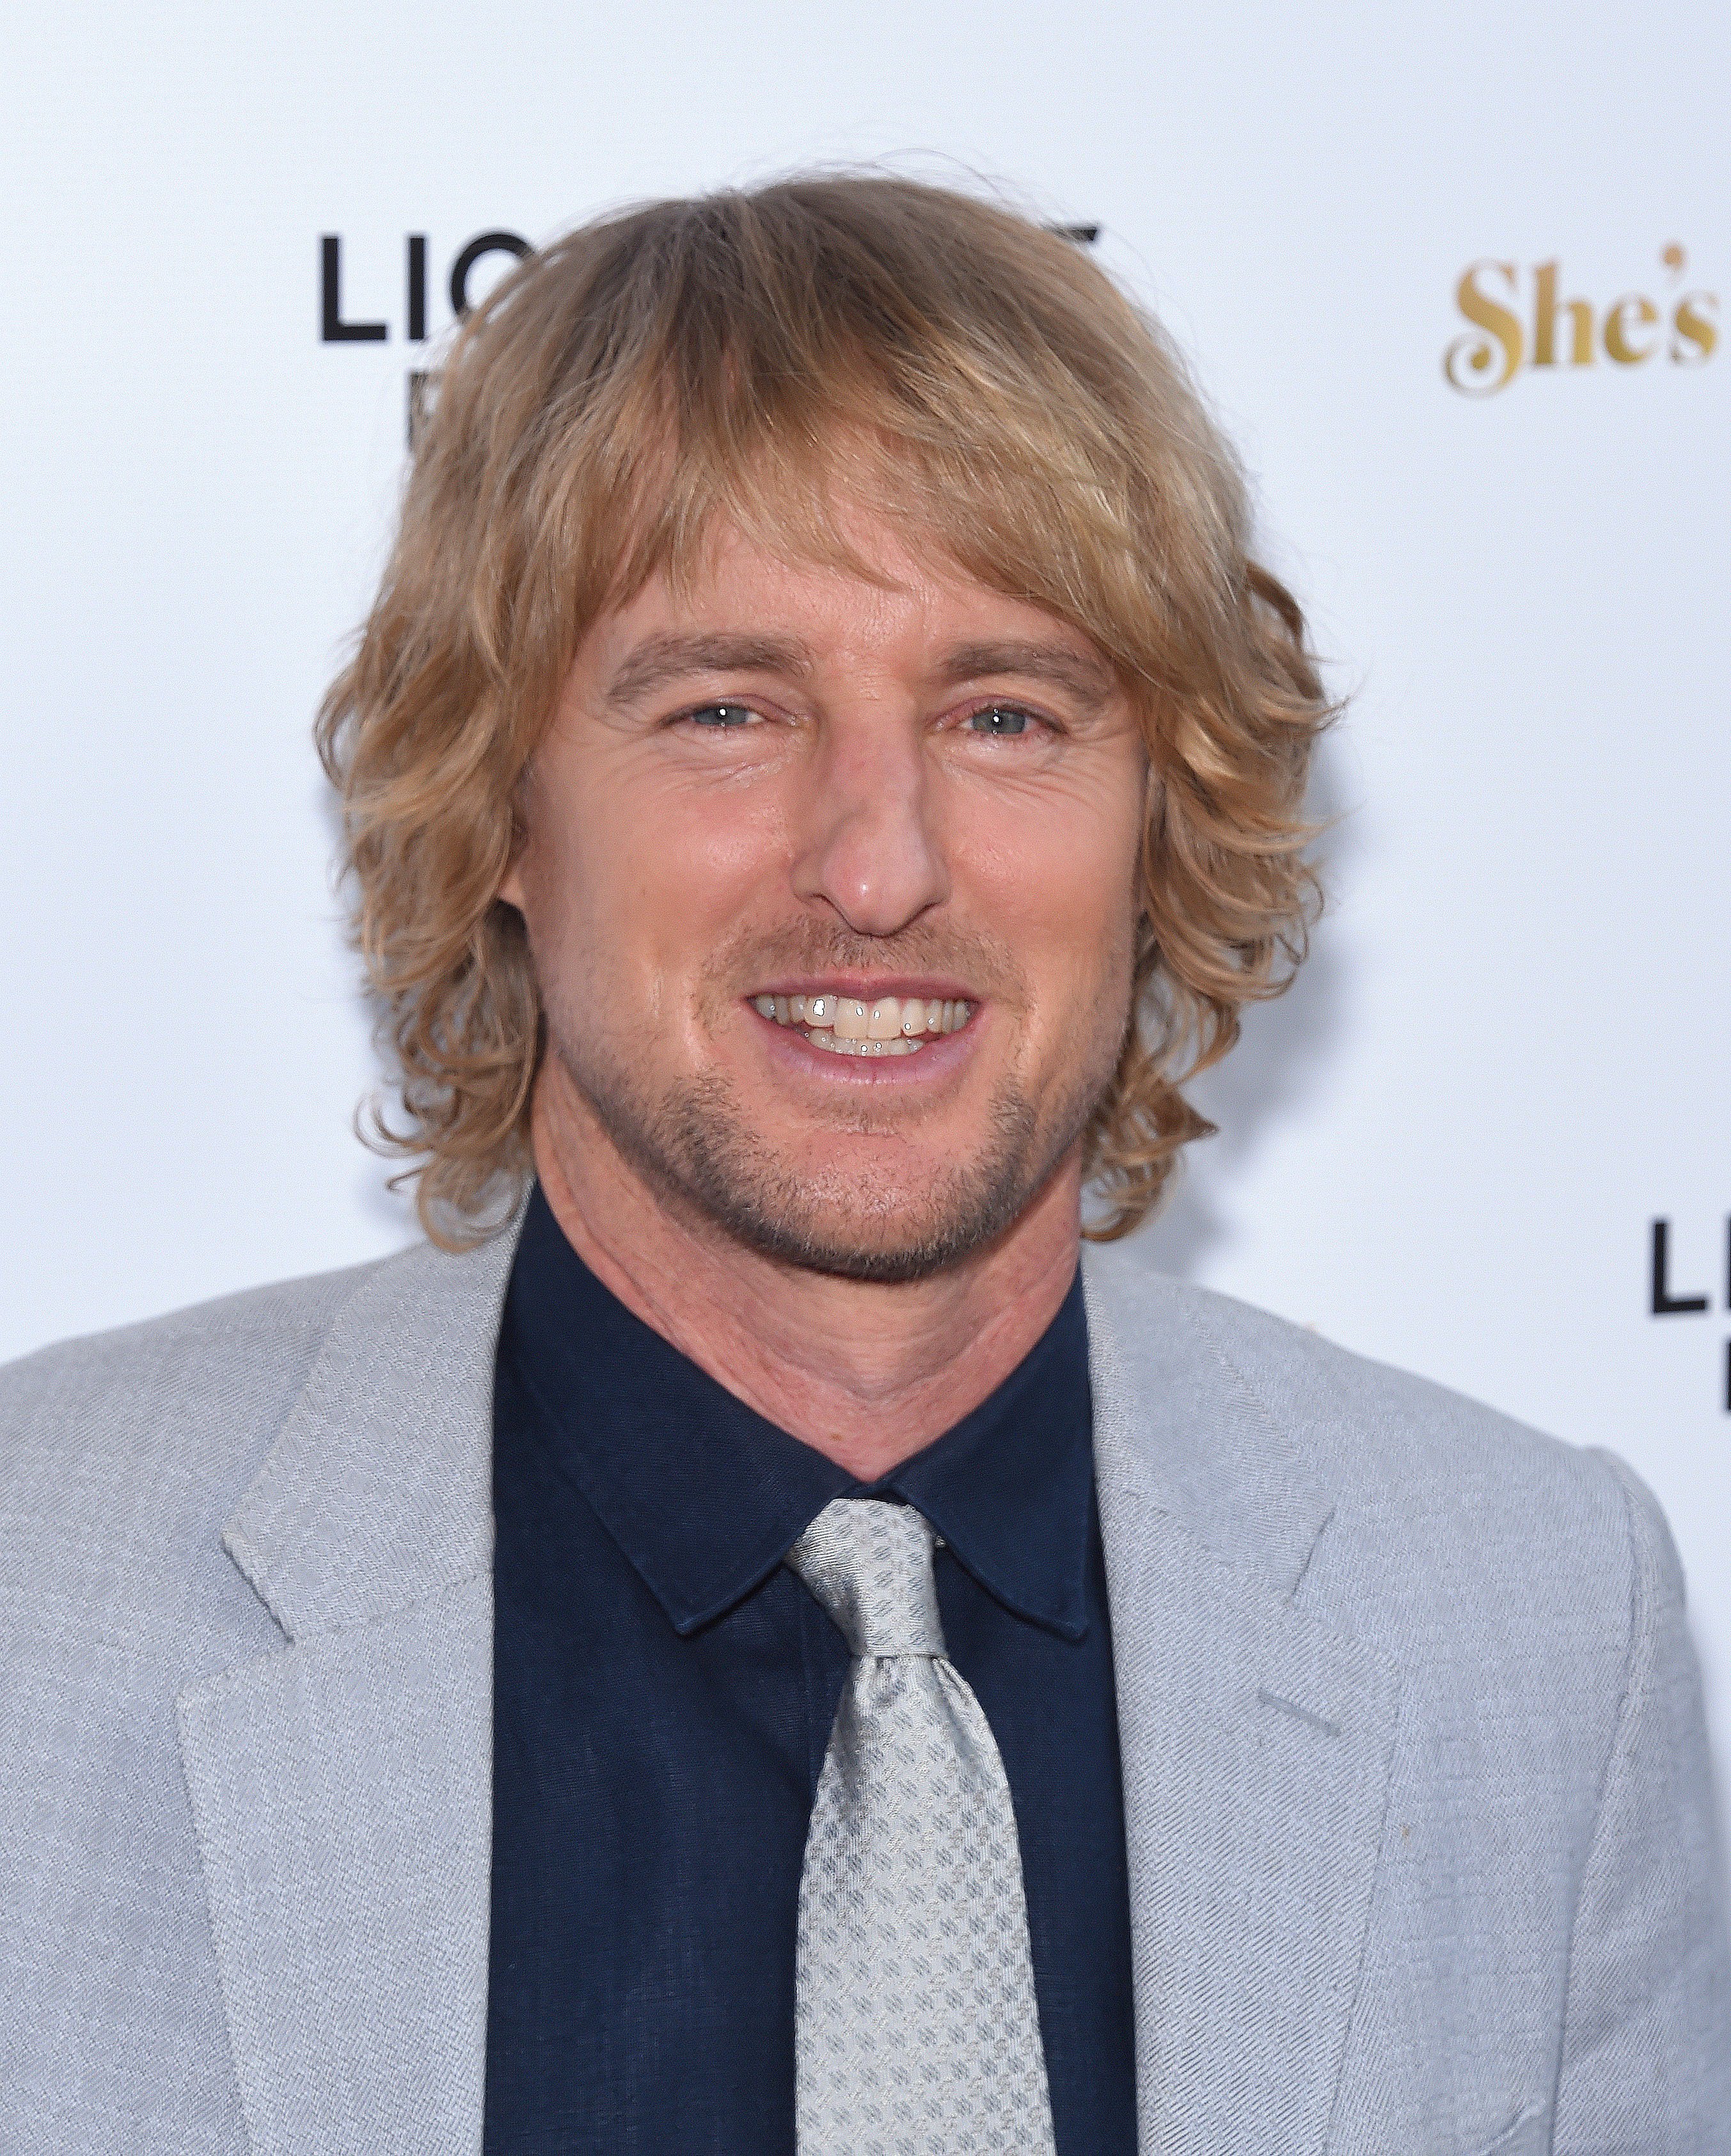 Owen Wilson pictured at the Premiere for "She's Funny That Way" at Harmony Gold on August 19, 2015 | Photo: Getty Images